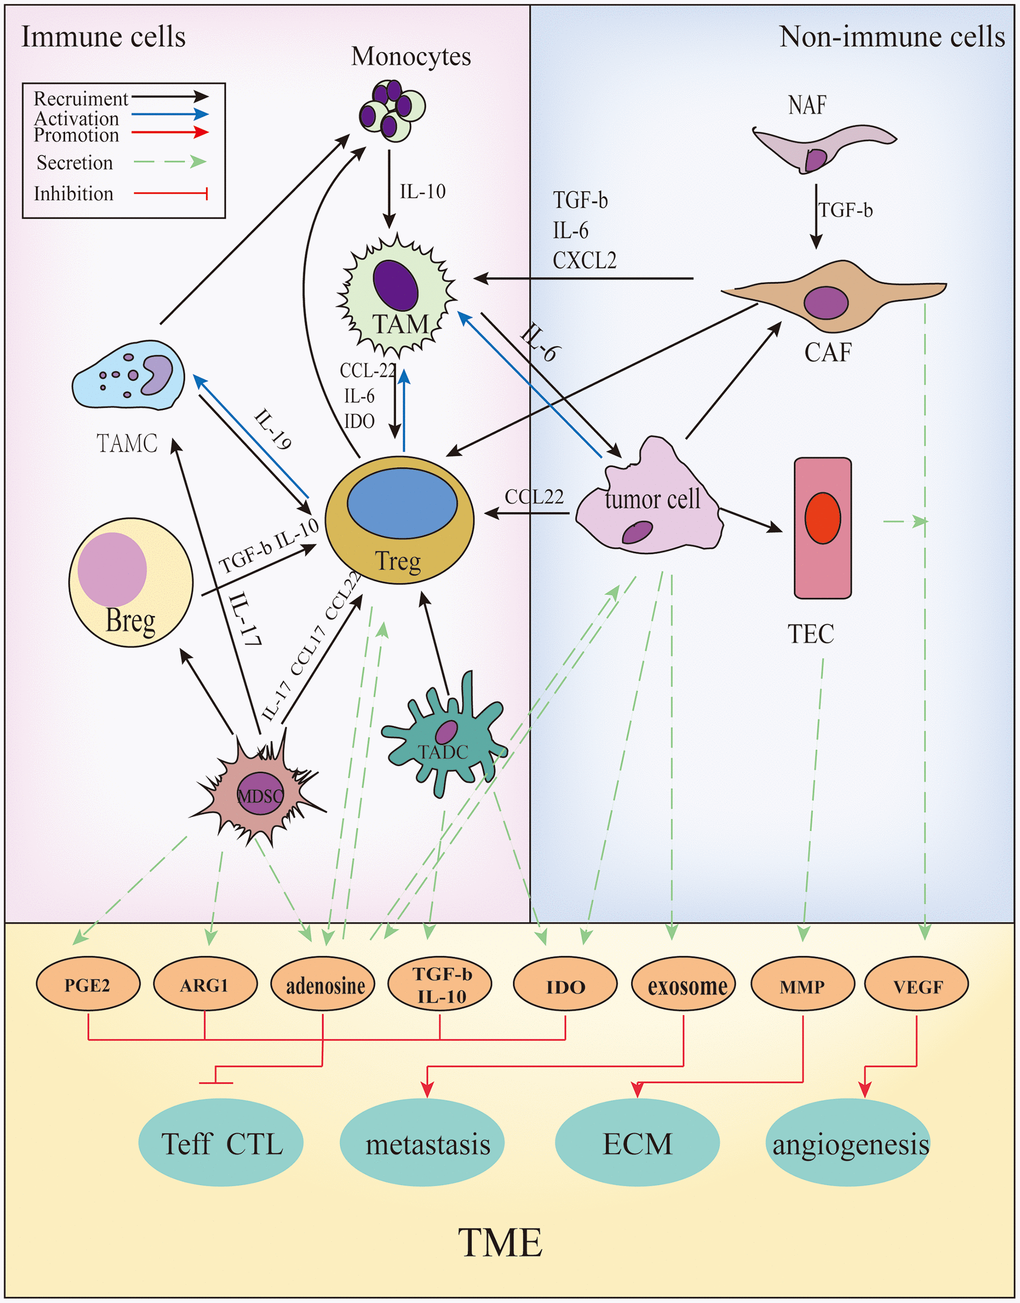 The cross-talks between immune and non-immune cells within the TME. In the TME, all kinds of cells secrete soluble molecules and interact with each other, such as prostaglandin E2(PGE2), arginase-1(ARG1), adenosine, transforming growth factor β(TGF-β), interleukin (IL)-10, indoleamine2,3-dioxygenase (IDO), exosomes, matrix metalloproteinase (MMPs), vascular endothelial growth factor (VEGF), and so on. These factors inhibit the function and proliferation of CD4+/ CD8+ T cells, promote angiogenesis, extracellular matrix (ECM) remodeling and tumor metastasis.